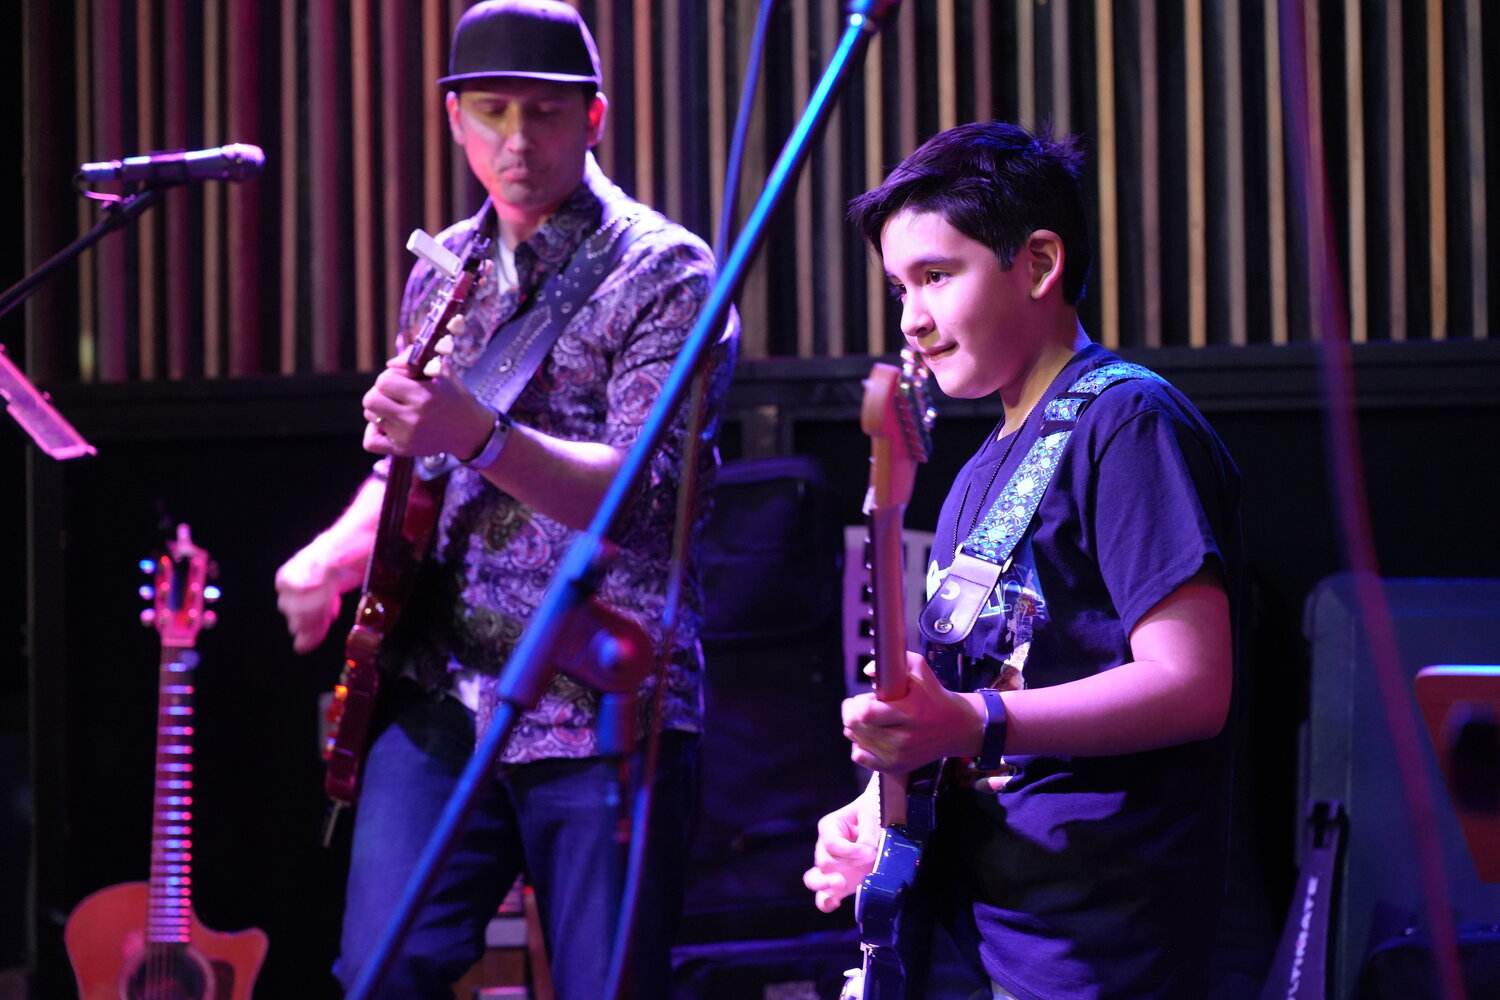 Gabriel Rodriguez, 9, of East Meadow, played ‘Winning,’ by Santana, in the Lot More Guitar Studio Student Jam last Saturday. Marc Viola, the studio’s owner, joined him on stage.